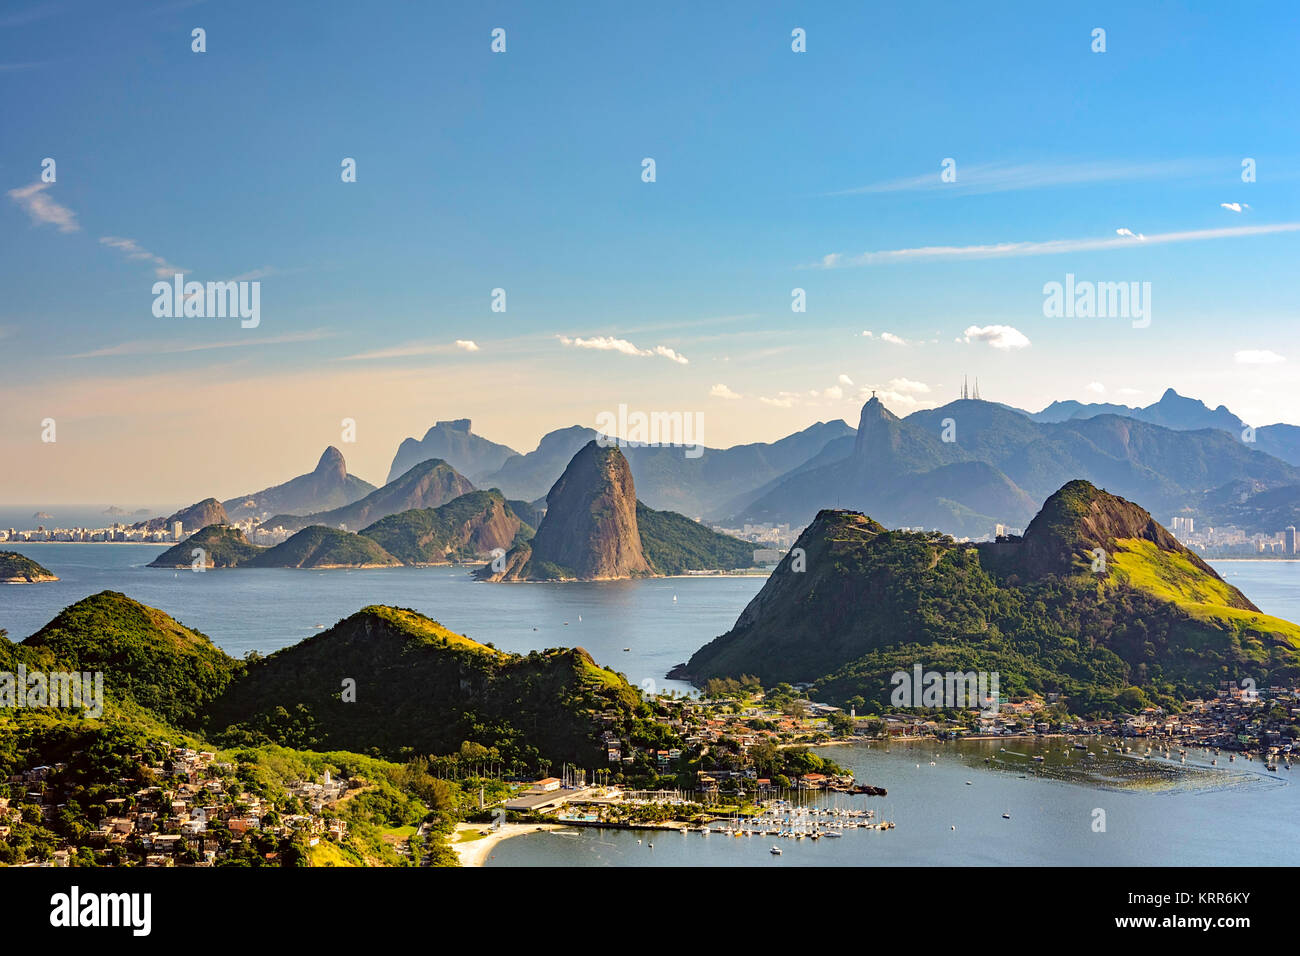 View of Rio de Janeiro, Guanabara bay, Sugarloaf hill and others montains from Niteroi city park Stock Photo